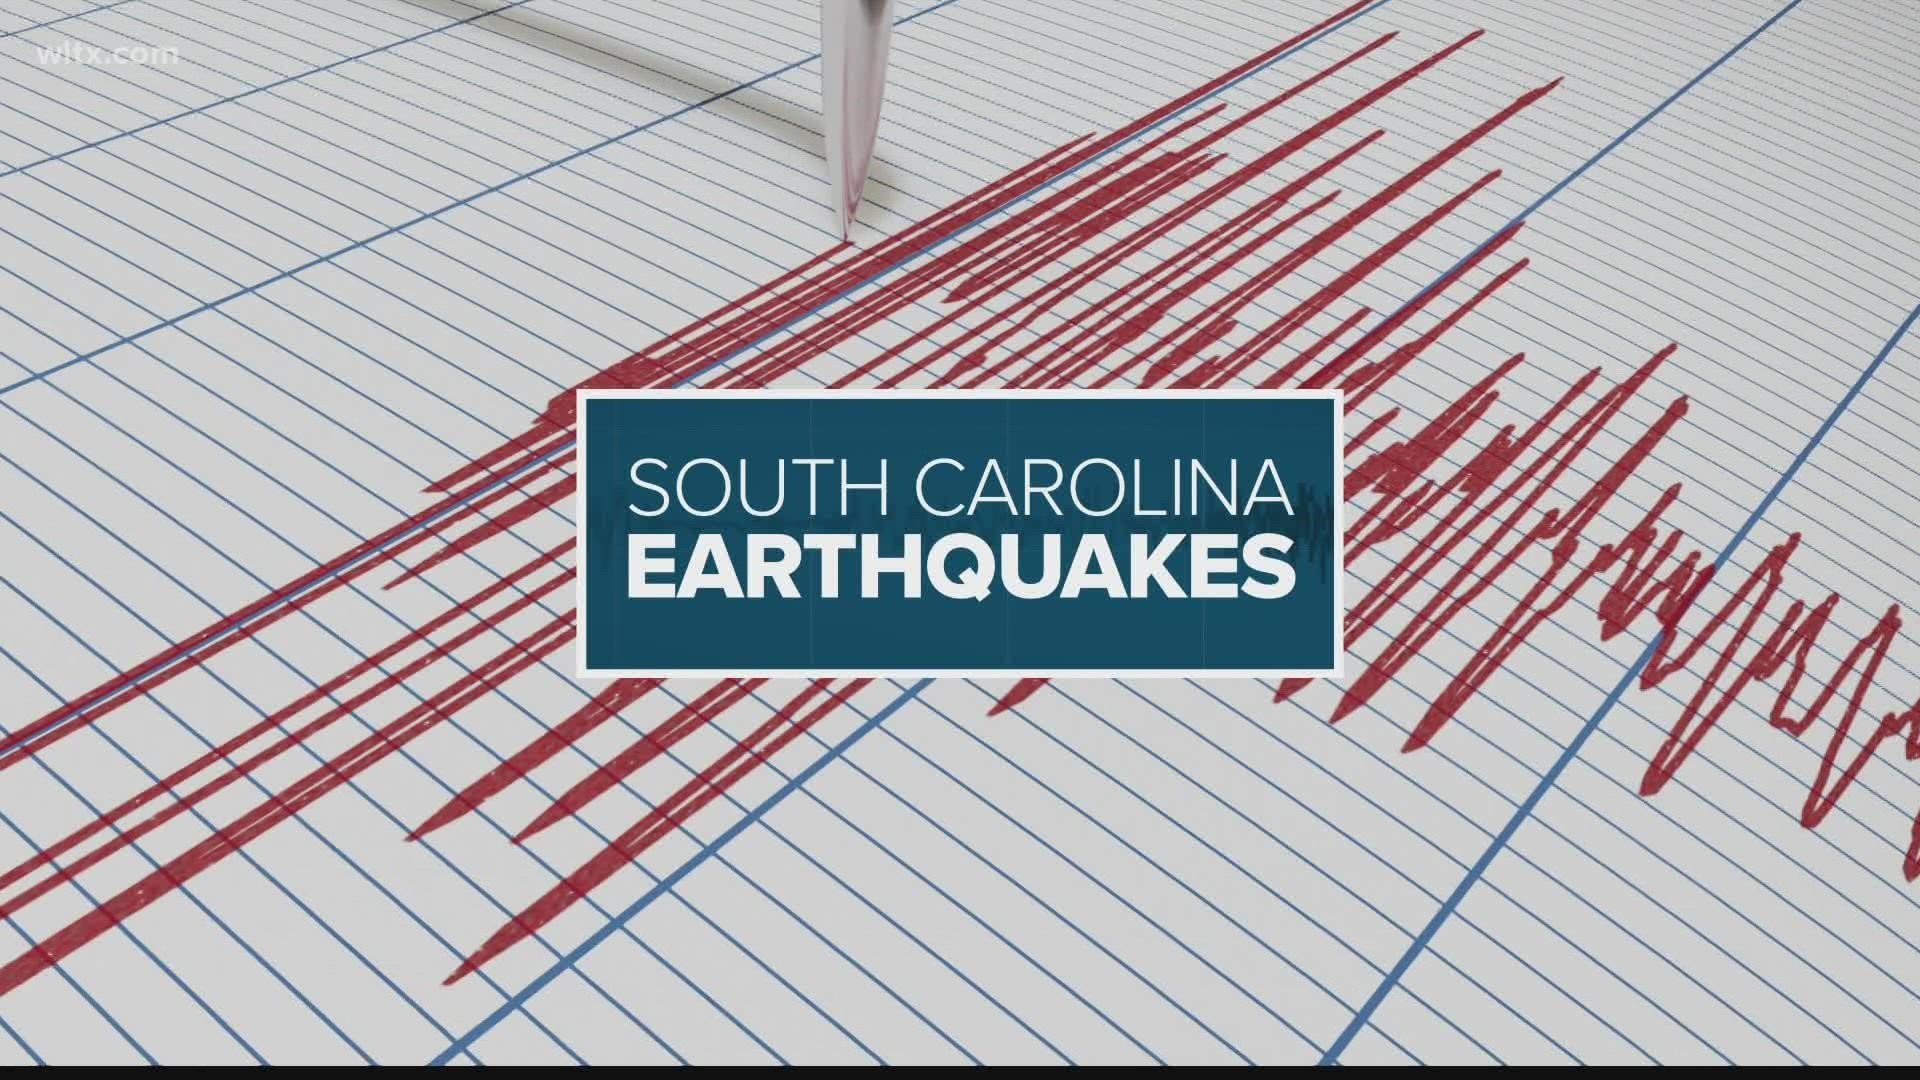 The Elgin-Lugoff region experienced another aftershock, making for the 17th quake in a month.